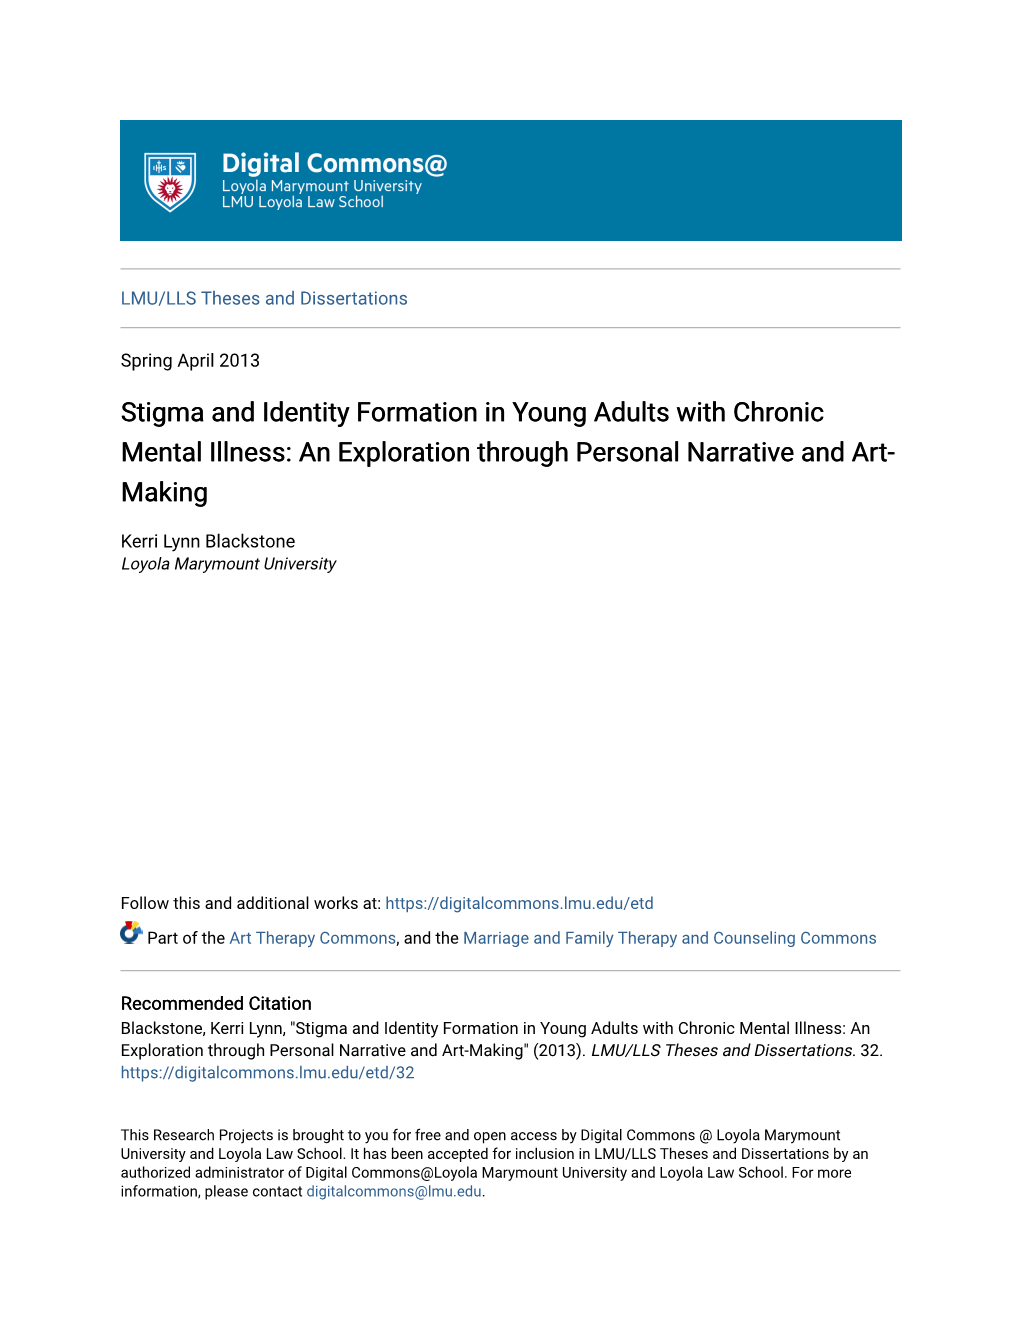 Stigma and Identity Formation in Young Adults with Chronic Mental Illness: an Exploration Through Personal Narrative and Art- Making